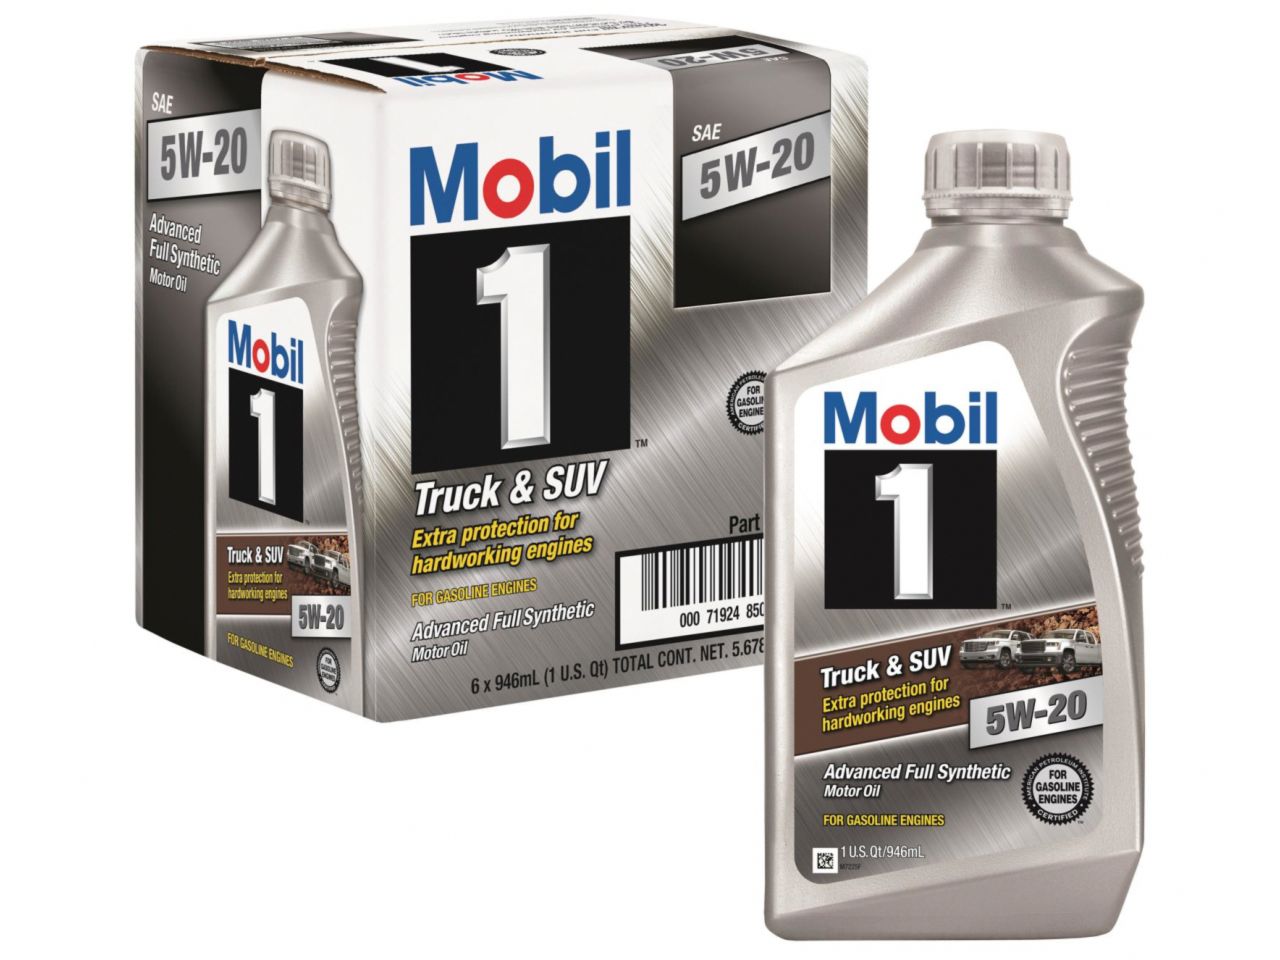 Mobil Motor Oil, Truck and SUV, Synthetic, 5W20, 1 Qt., Set Of 6